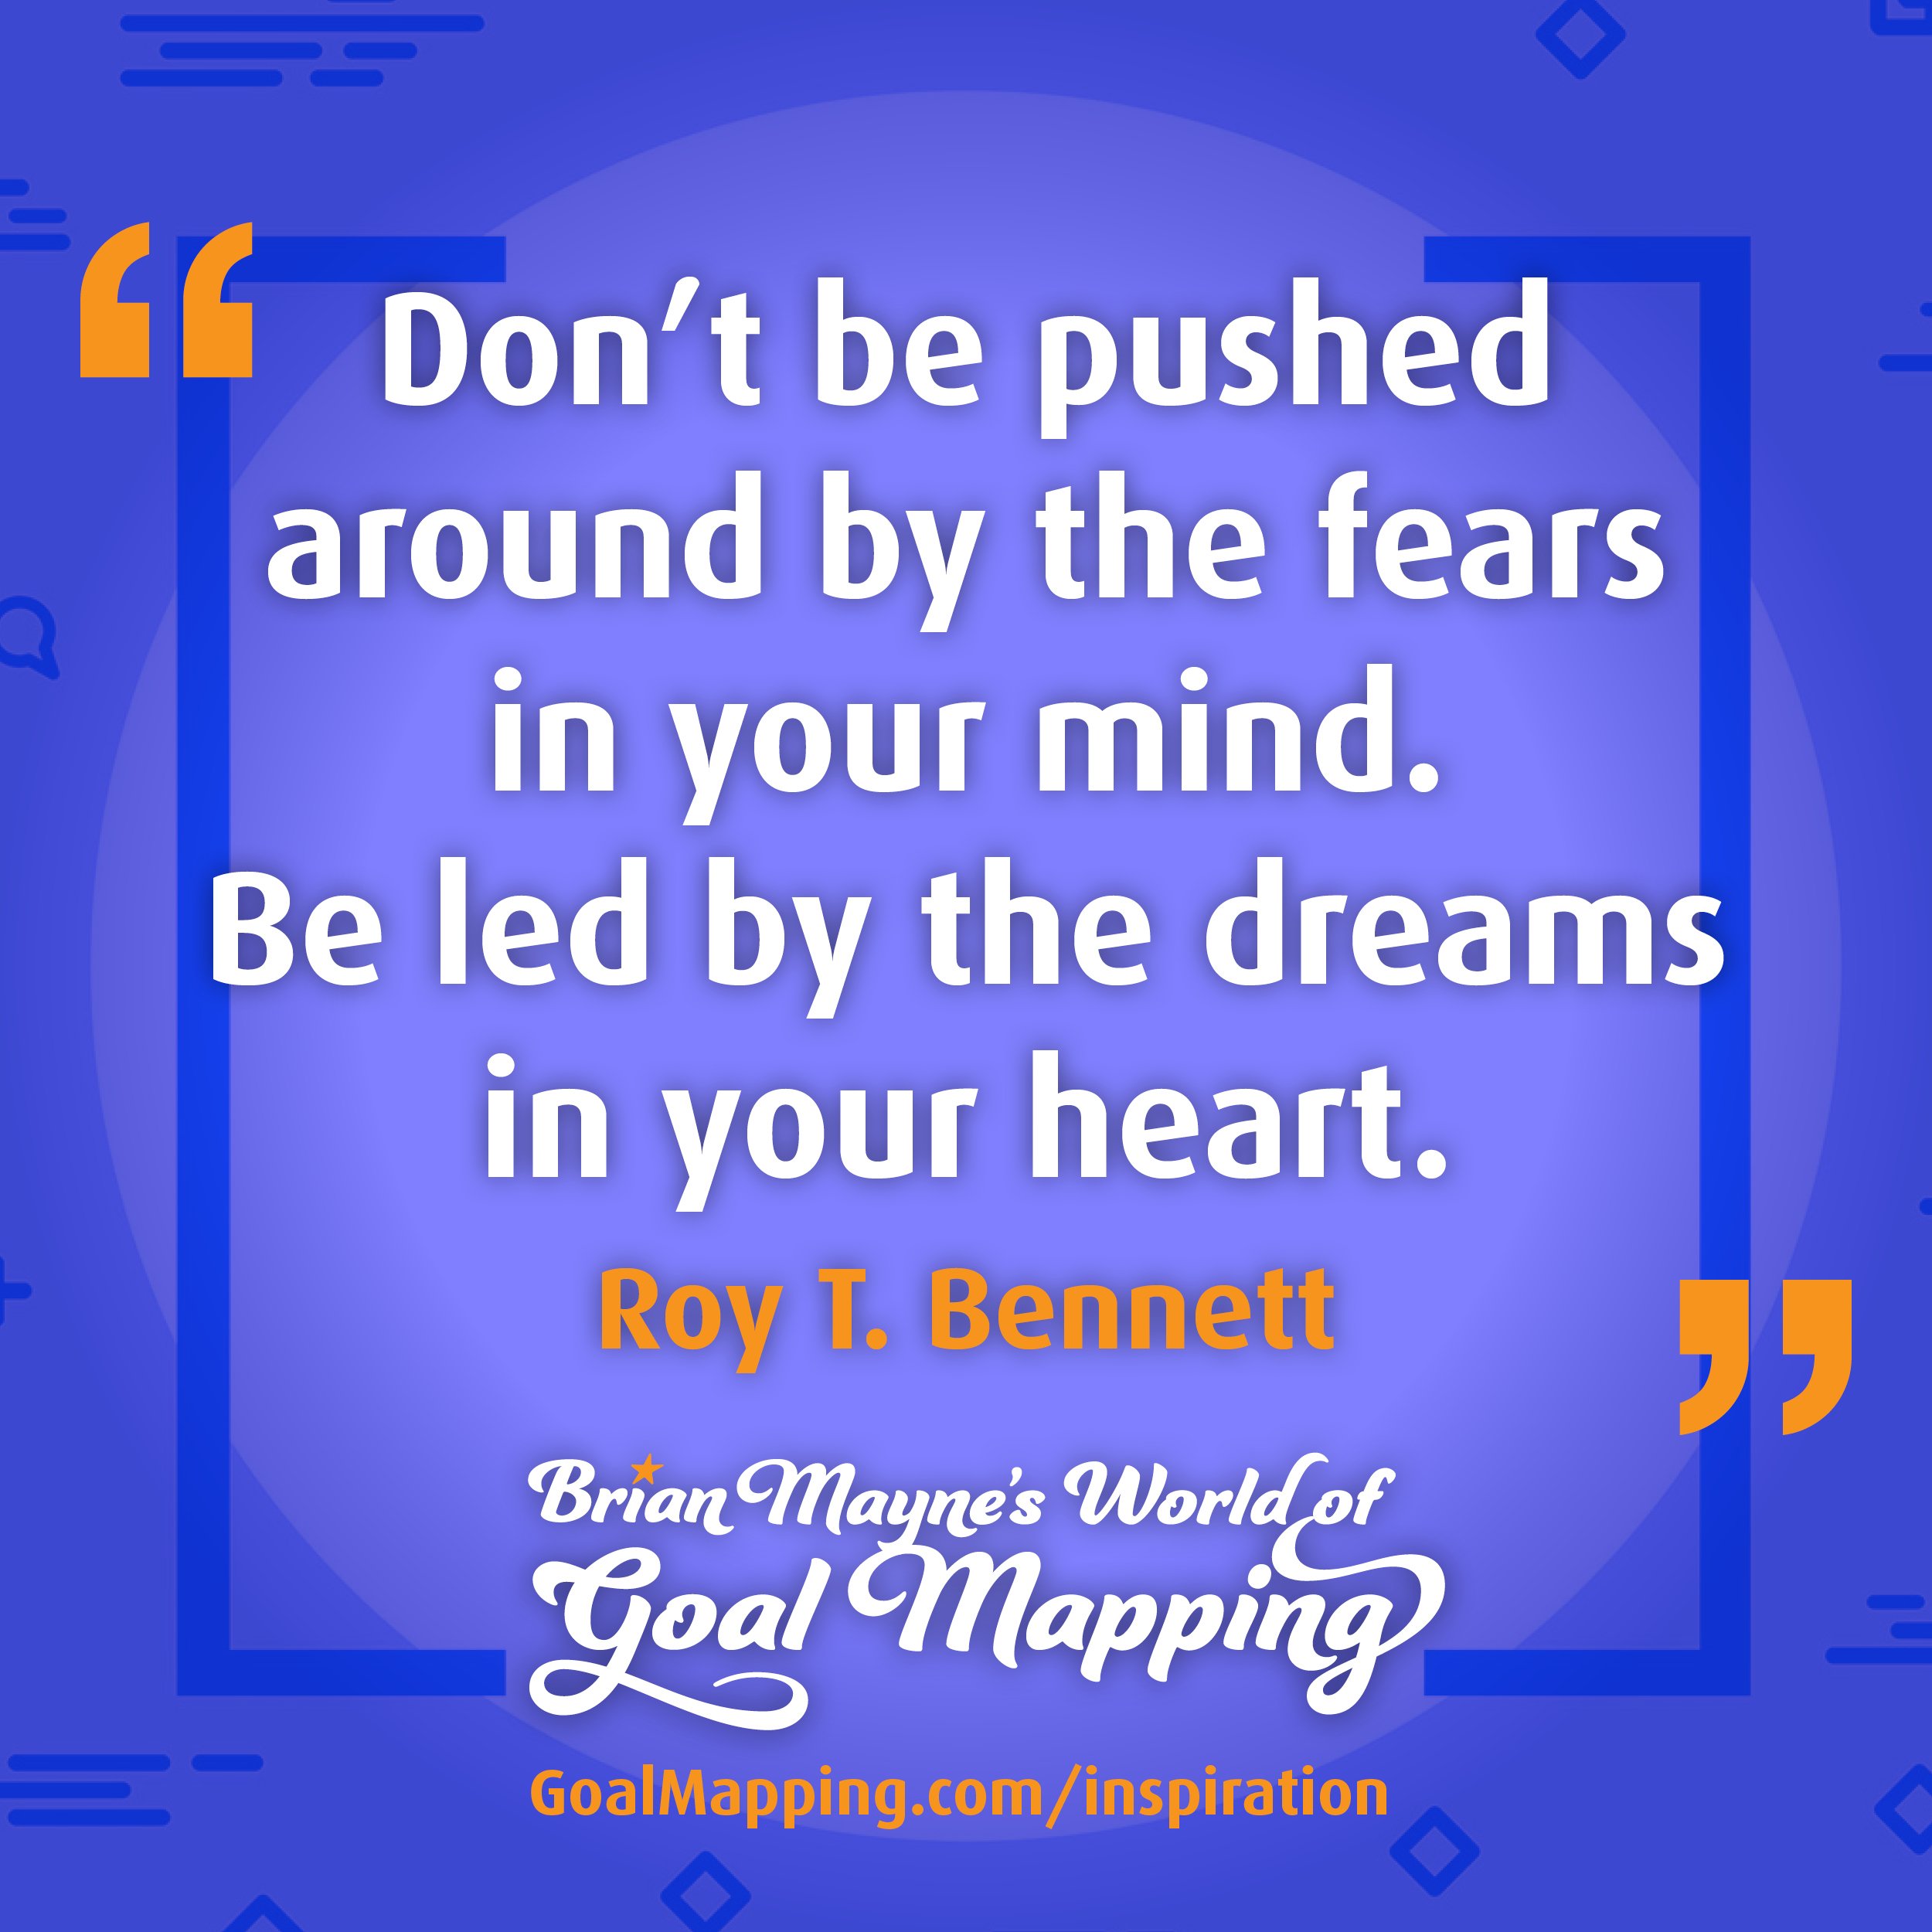 "Don’t be pushed around by the fears in your mind. Be led by the dreams in your heart." Roy T. Bennett